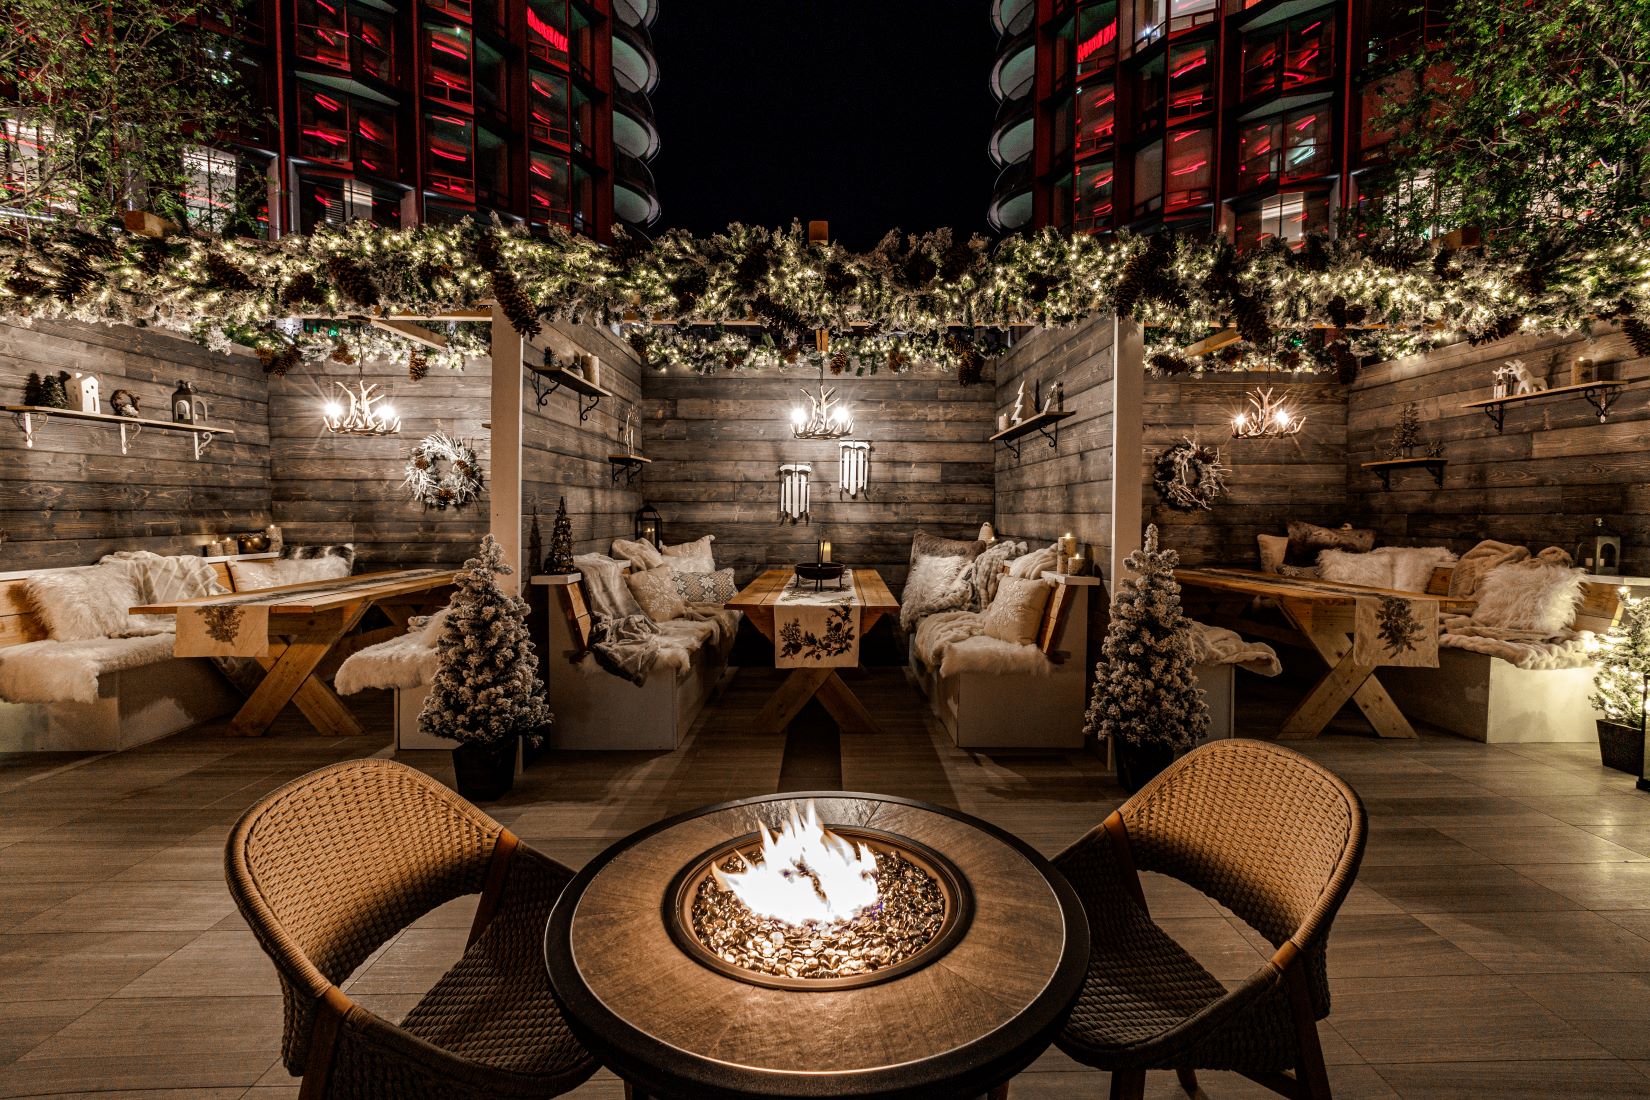 An image of the Après-Ski dining experience at the Fairmont Century Plaza.